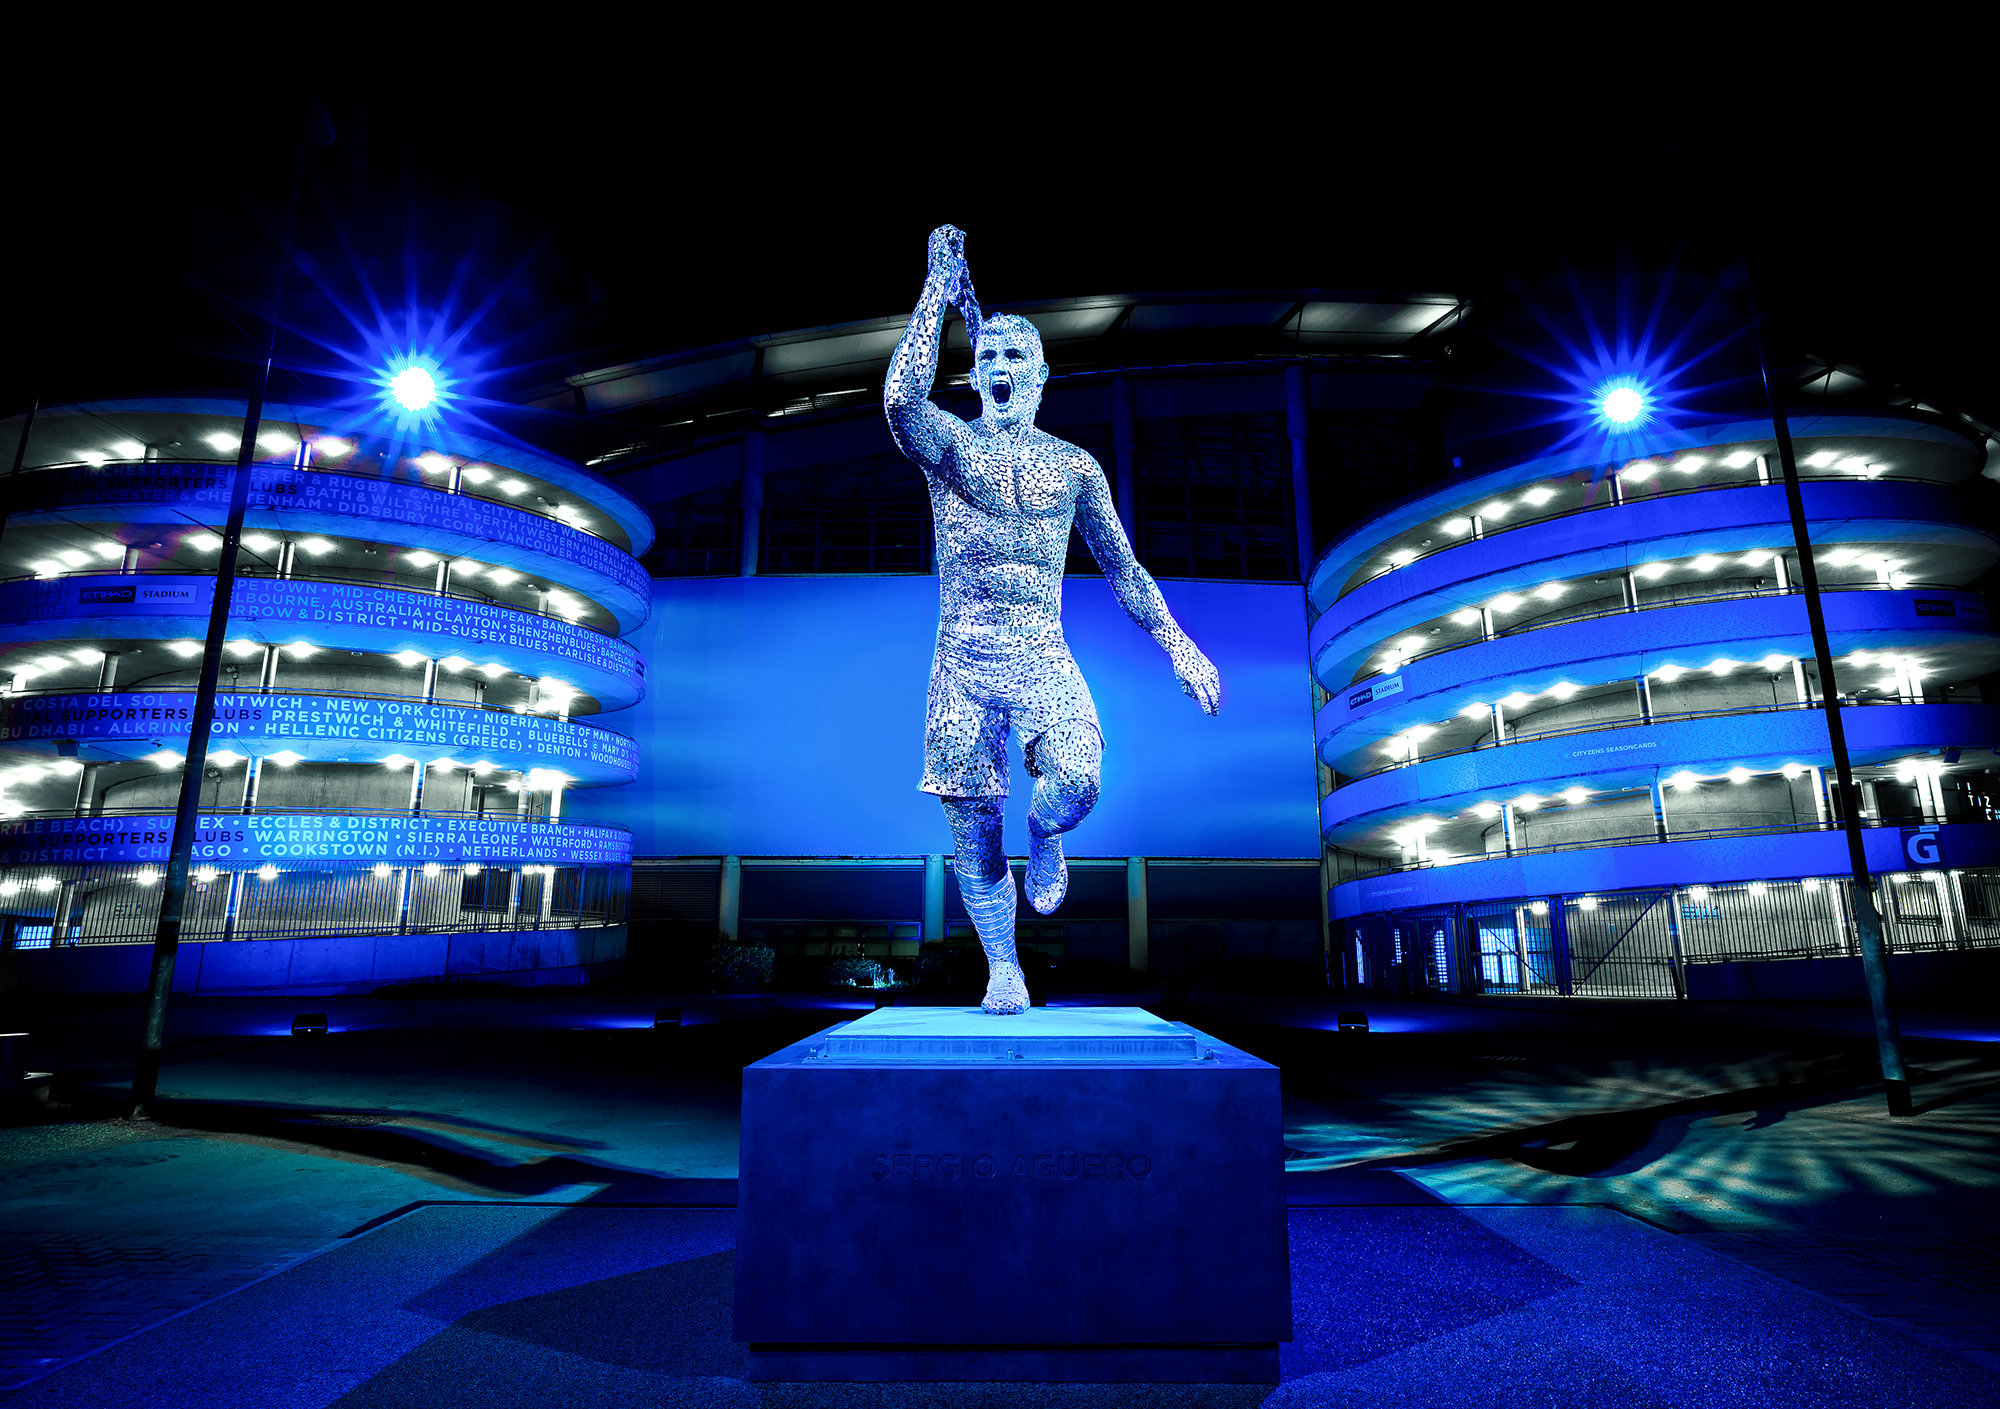 Sergio Aguero: Manchester City great is immortalized with statue | CNN